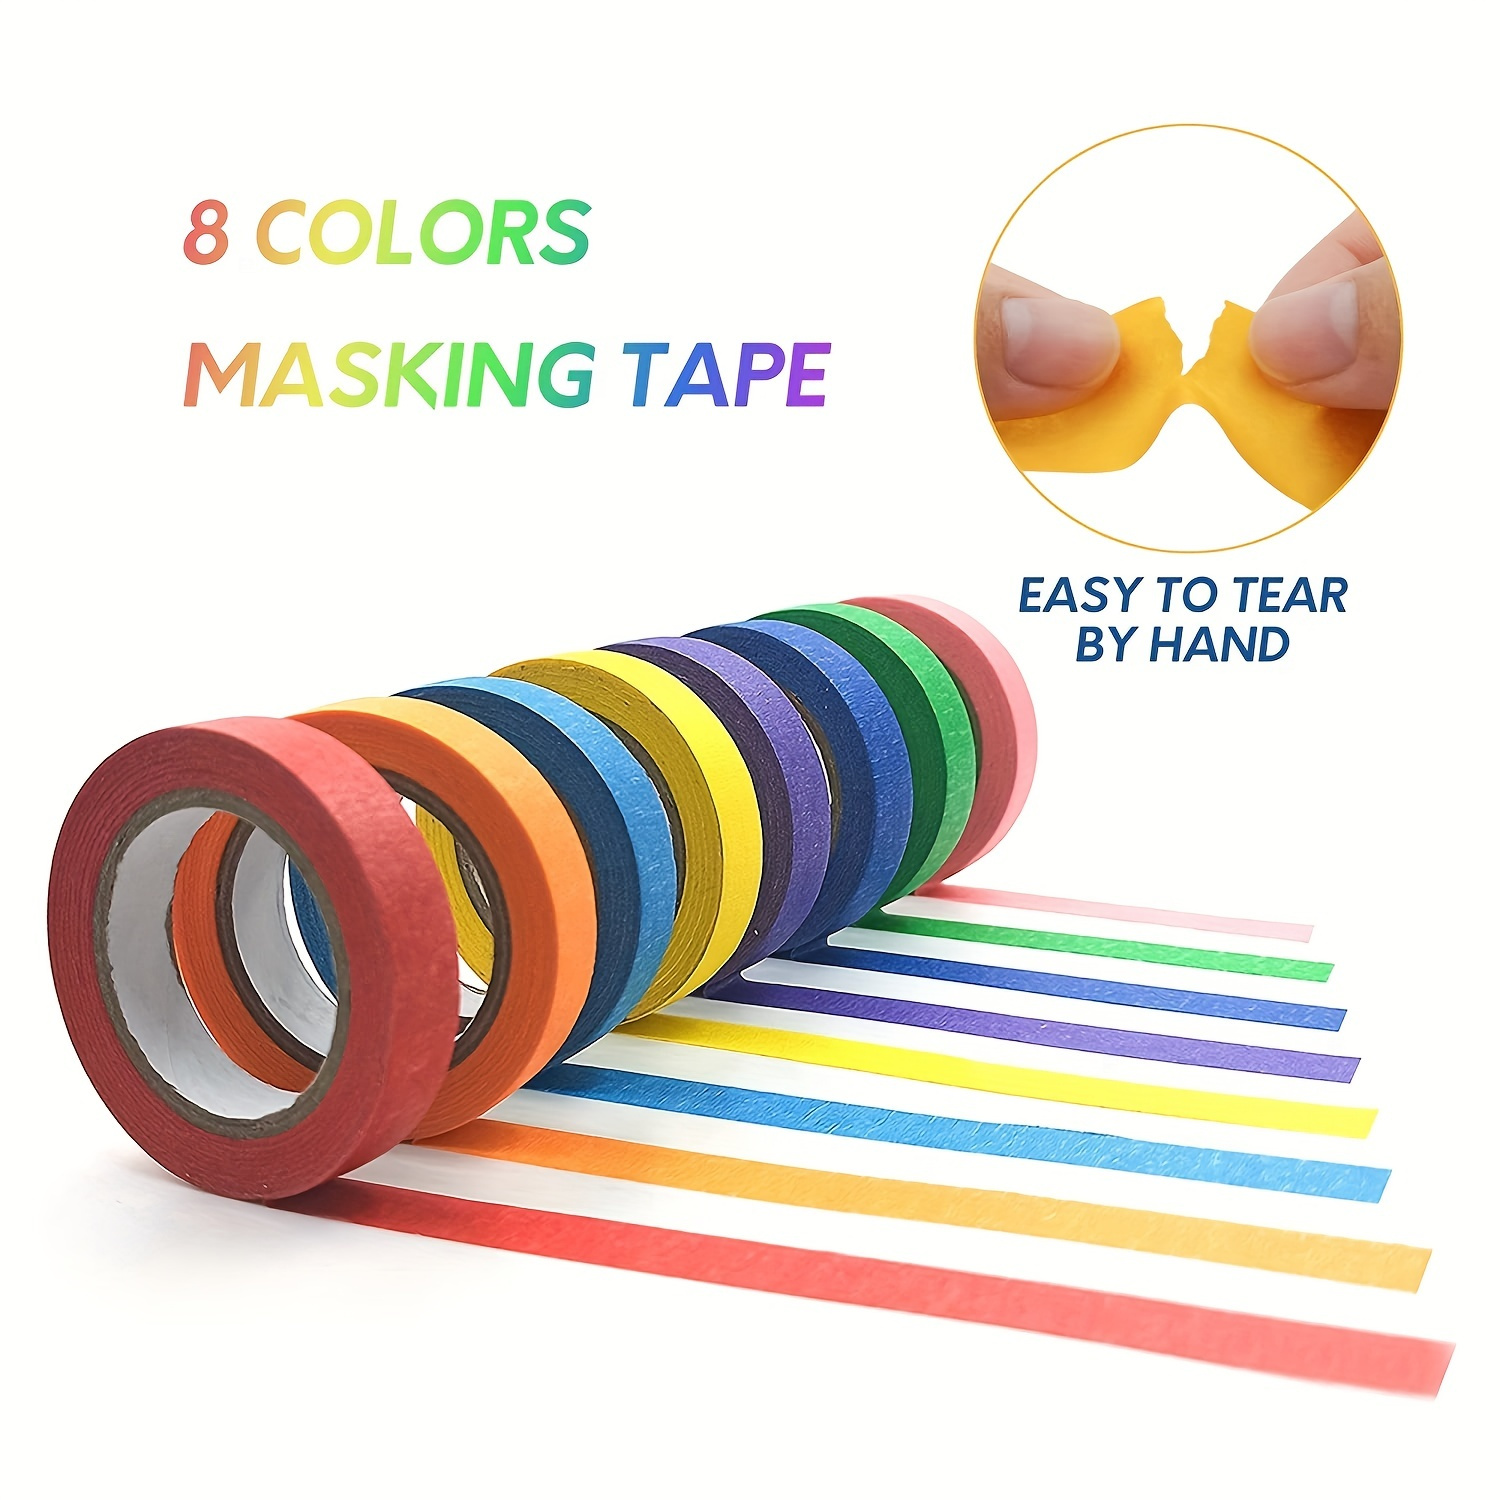 4 Rolls Colored Masking Tape, Washi Tape, 0.59 inch Wide by 22 Yard,  Painters Tape for Arts & Crafts, School Projects, Labeling, Party  Decorations